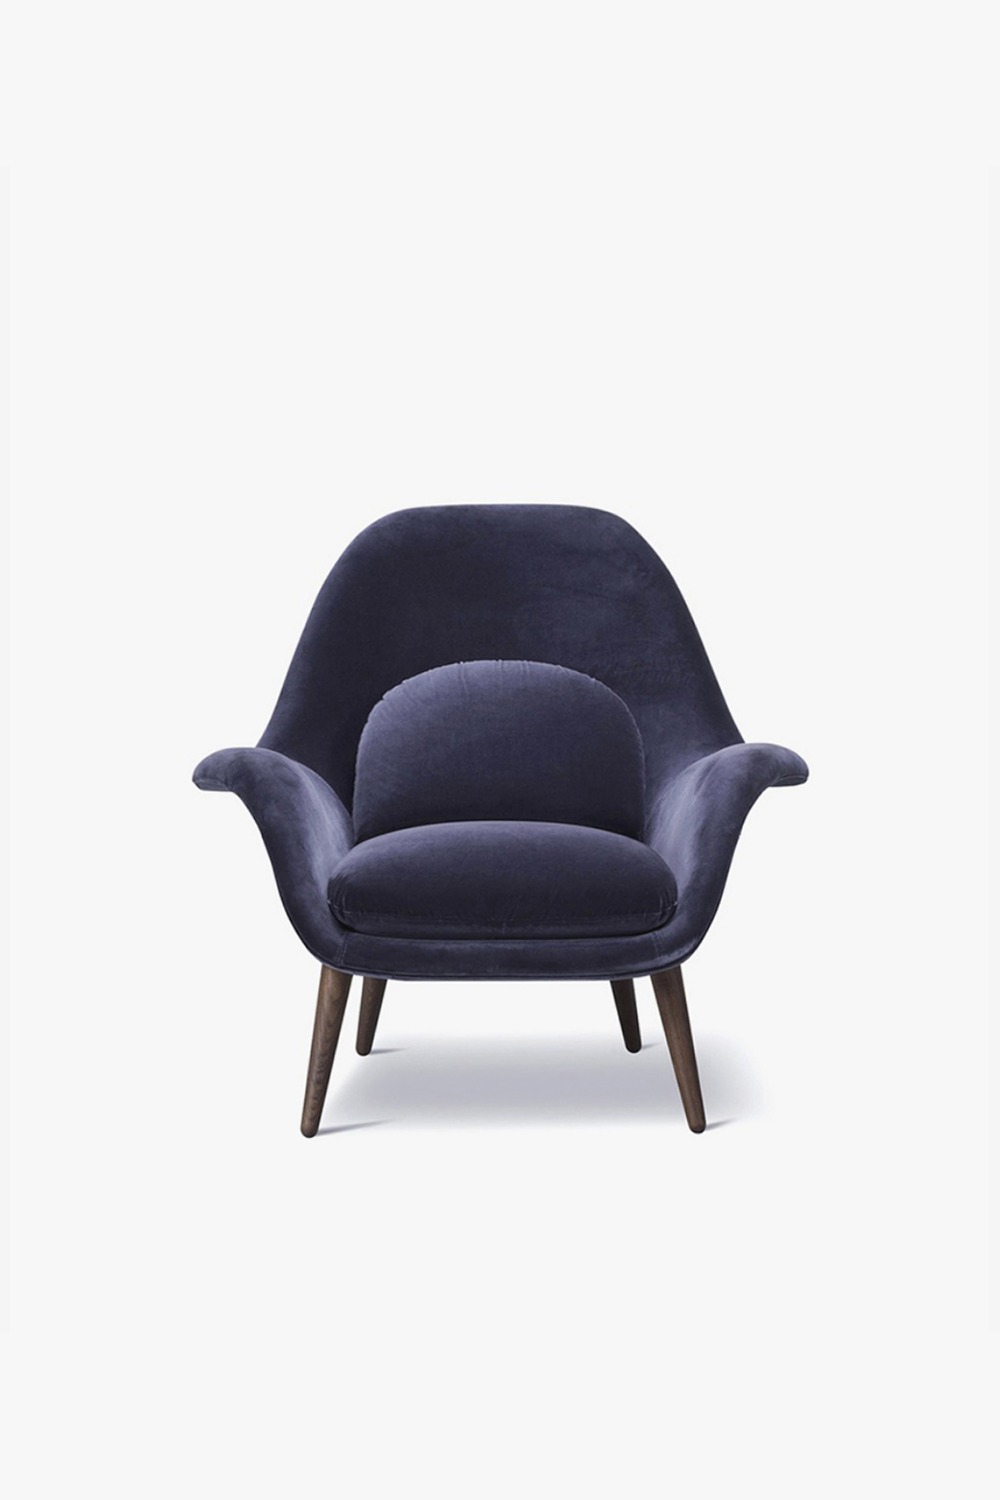 [Fredericia] Swoon Lounge chair (Navy)